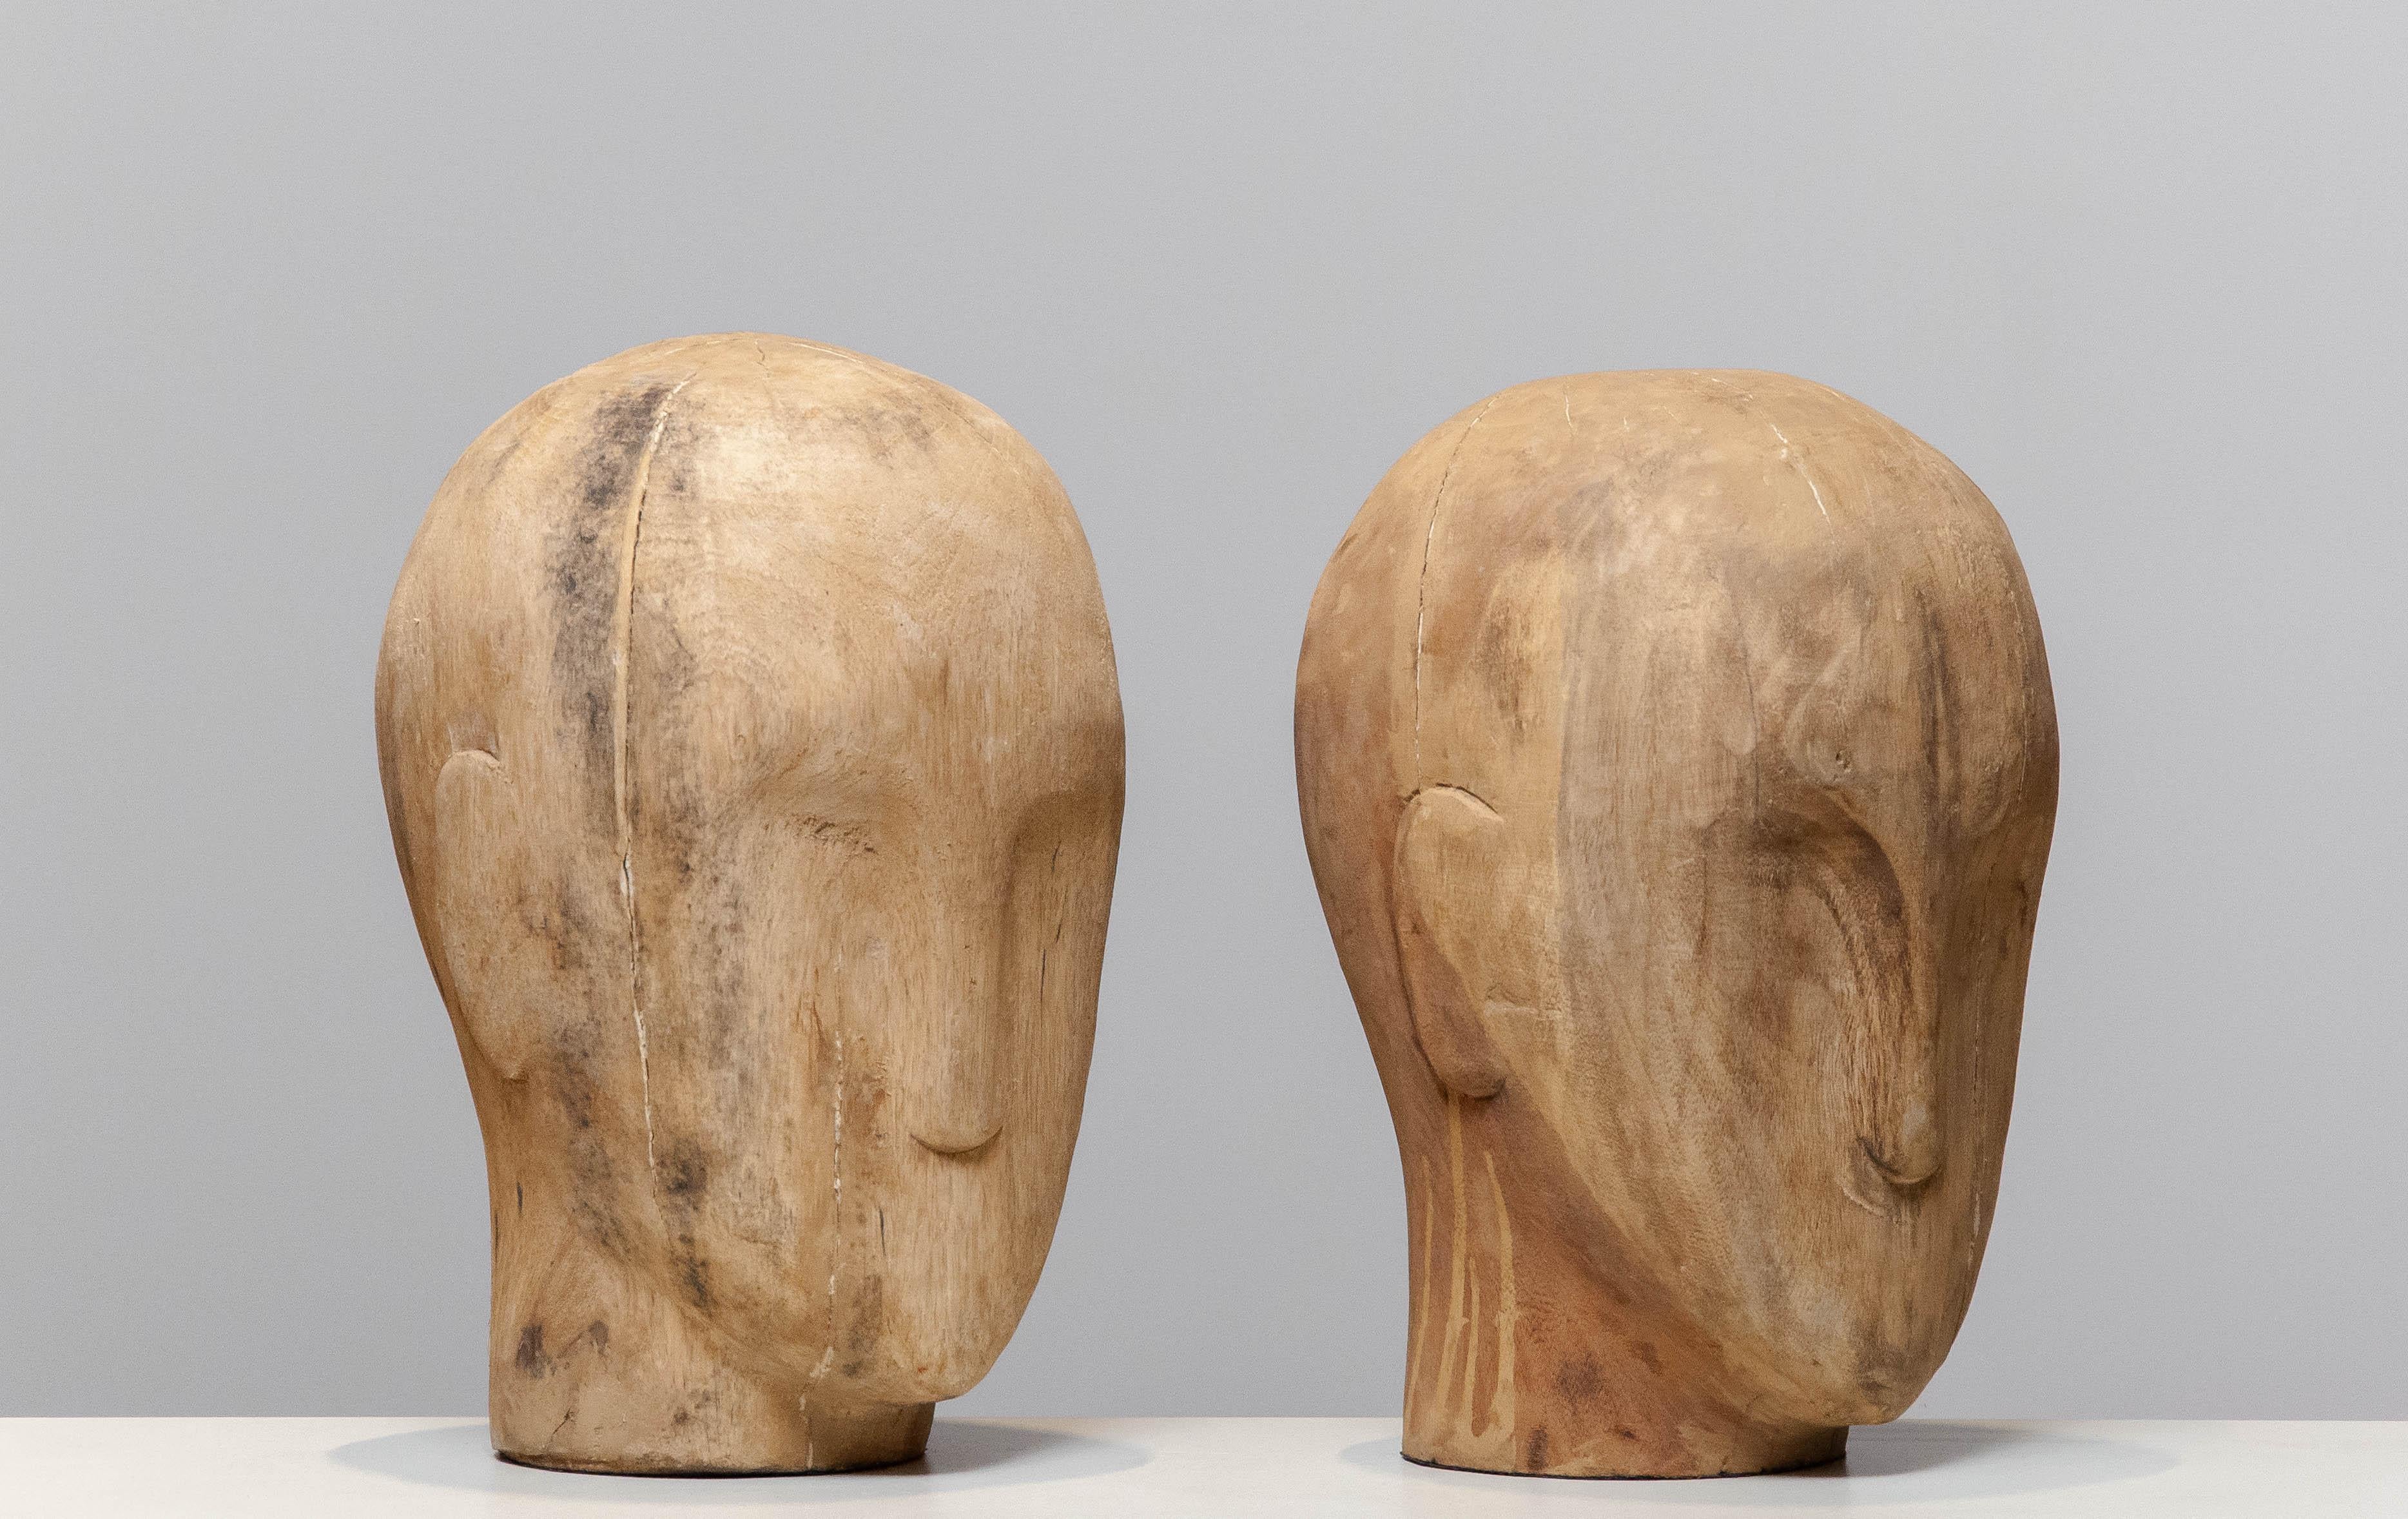 Beautiful pair faded wooden gent milliners heads from the early 1900's.
The faded lines and the non-treated wood gives these heads there beautiful character. Absolutely top of the line decorative objects. 
Please note that we have one more in our